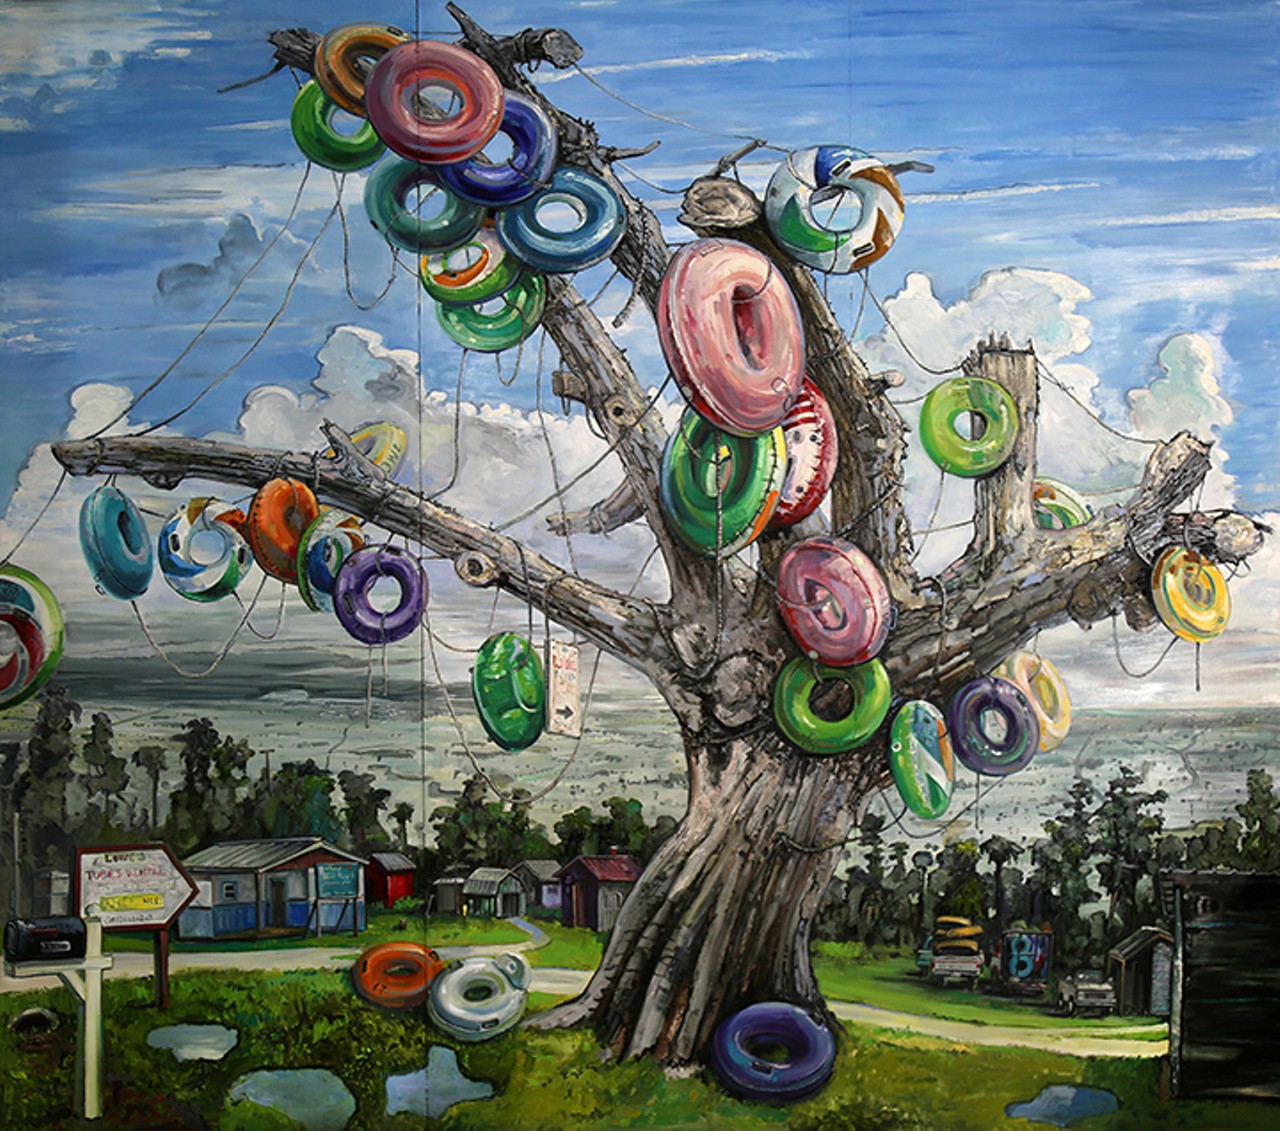 Through Aug. 18The Florida Prize in Contemporary Art Exhibition at Orlando Museum of Art"Lowe's Tubes, Ichetucknee" by Amer Koba&#154;lija